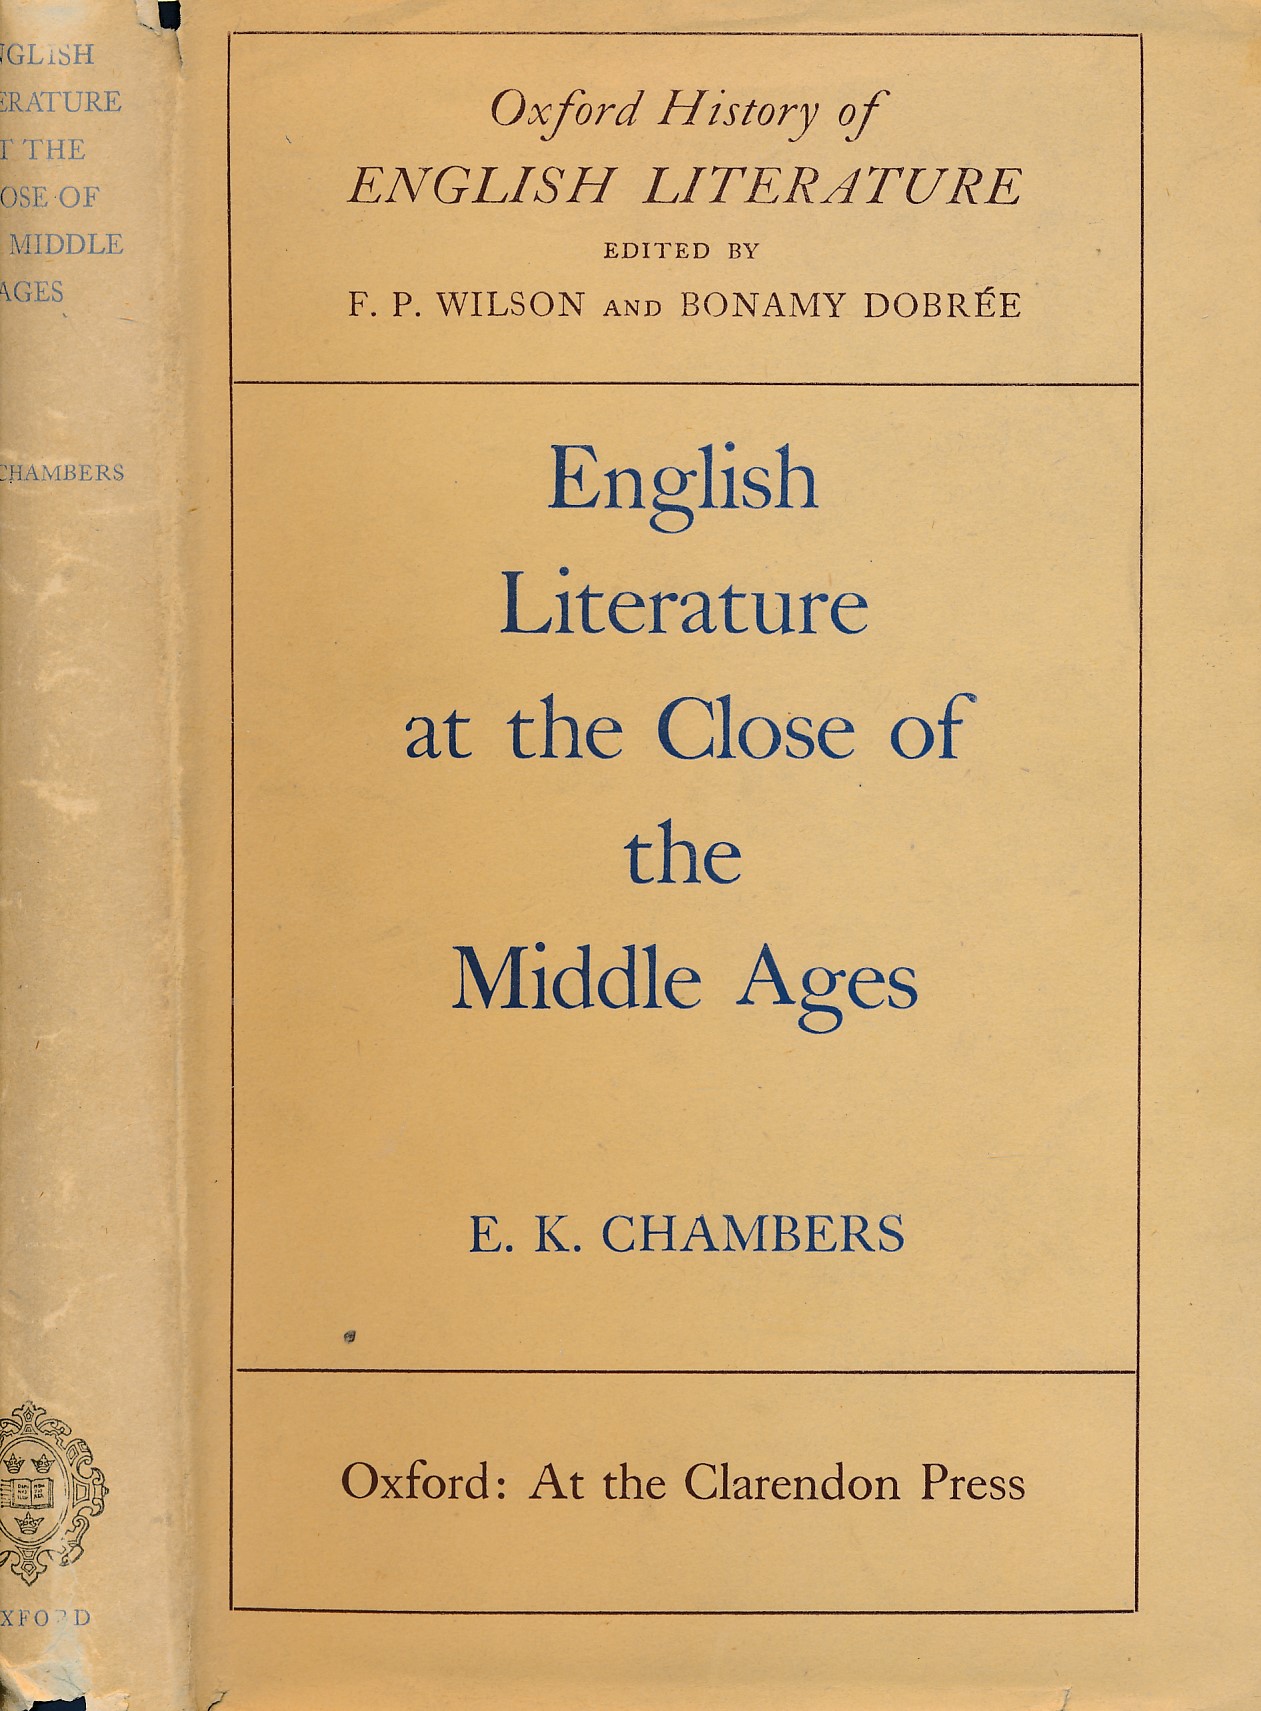 English Literature at the Close of The Middle Ages